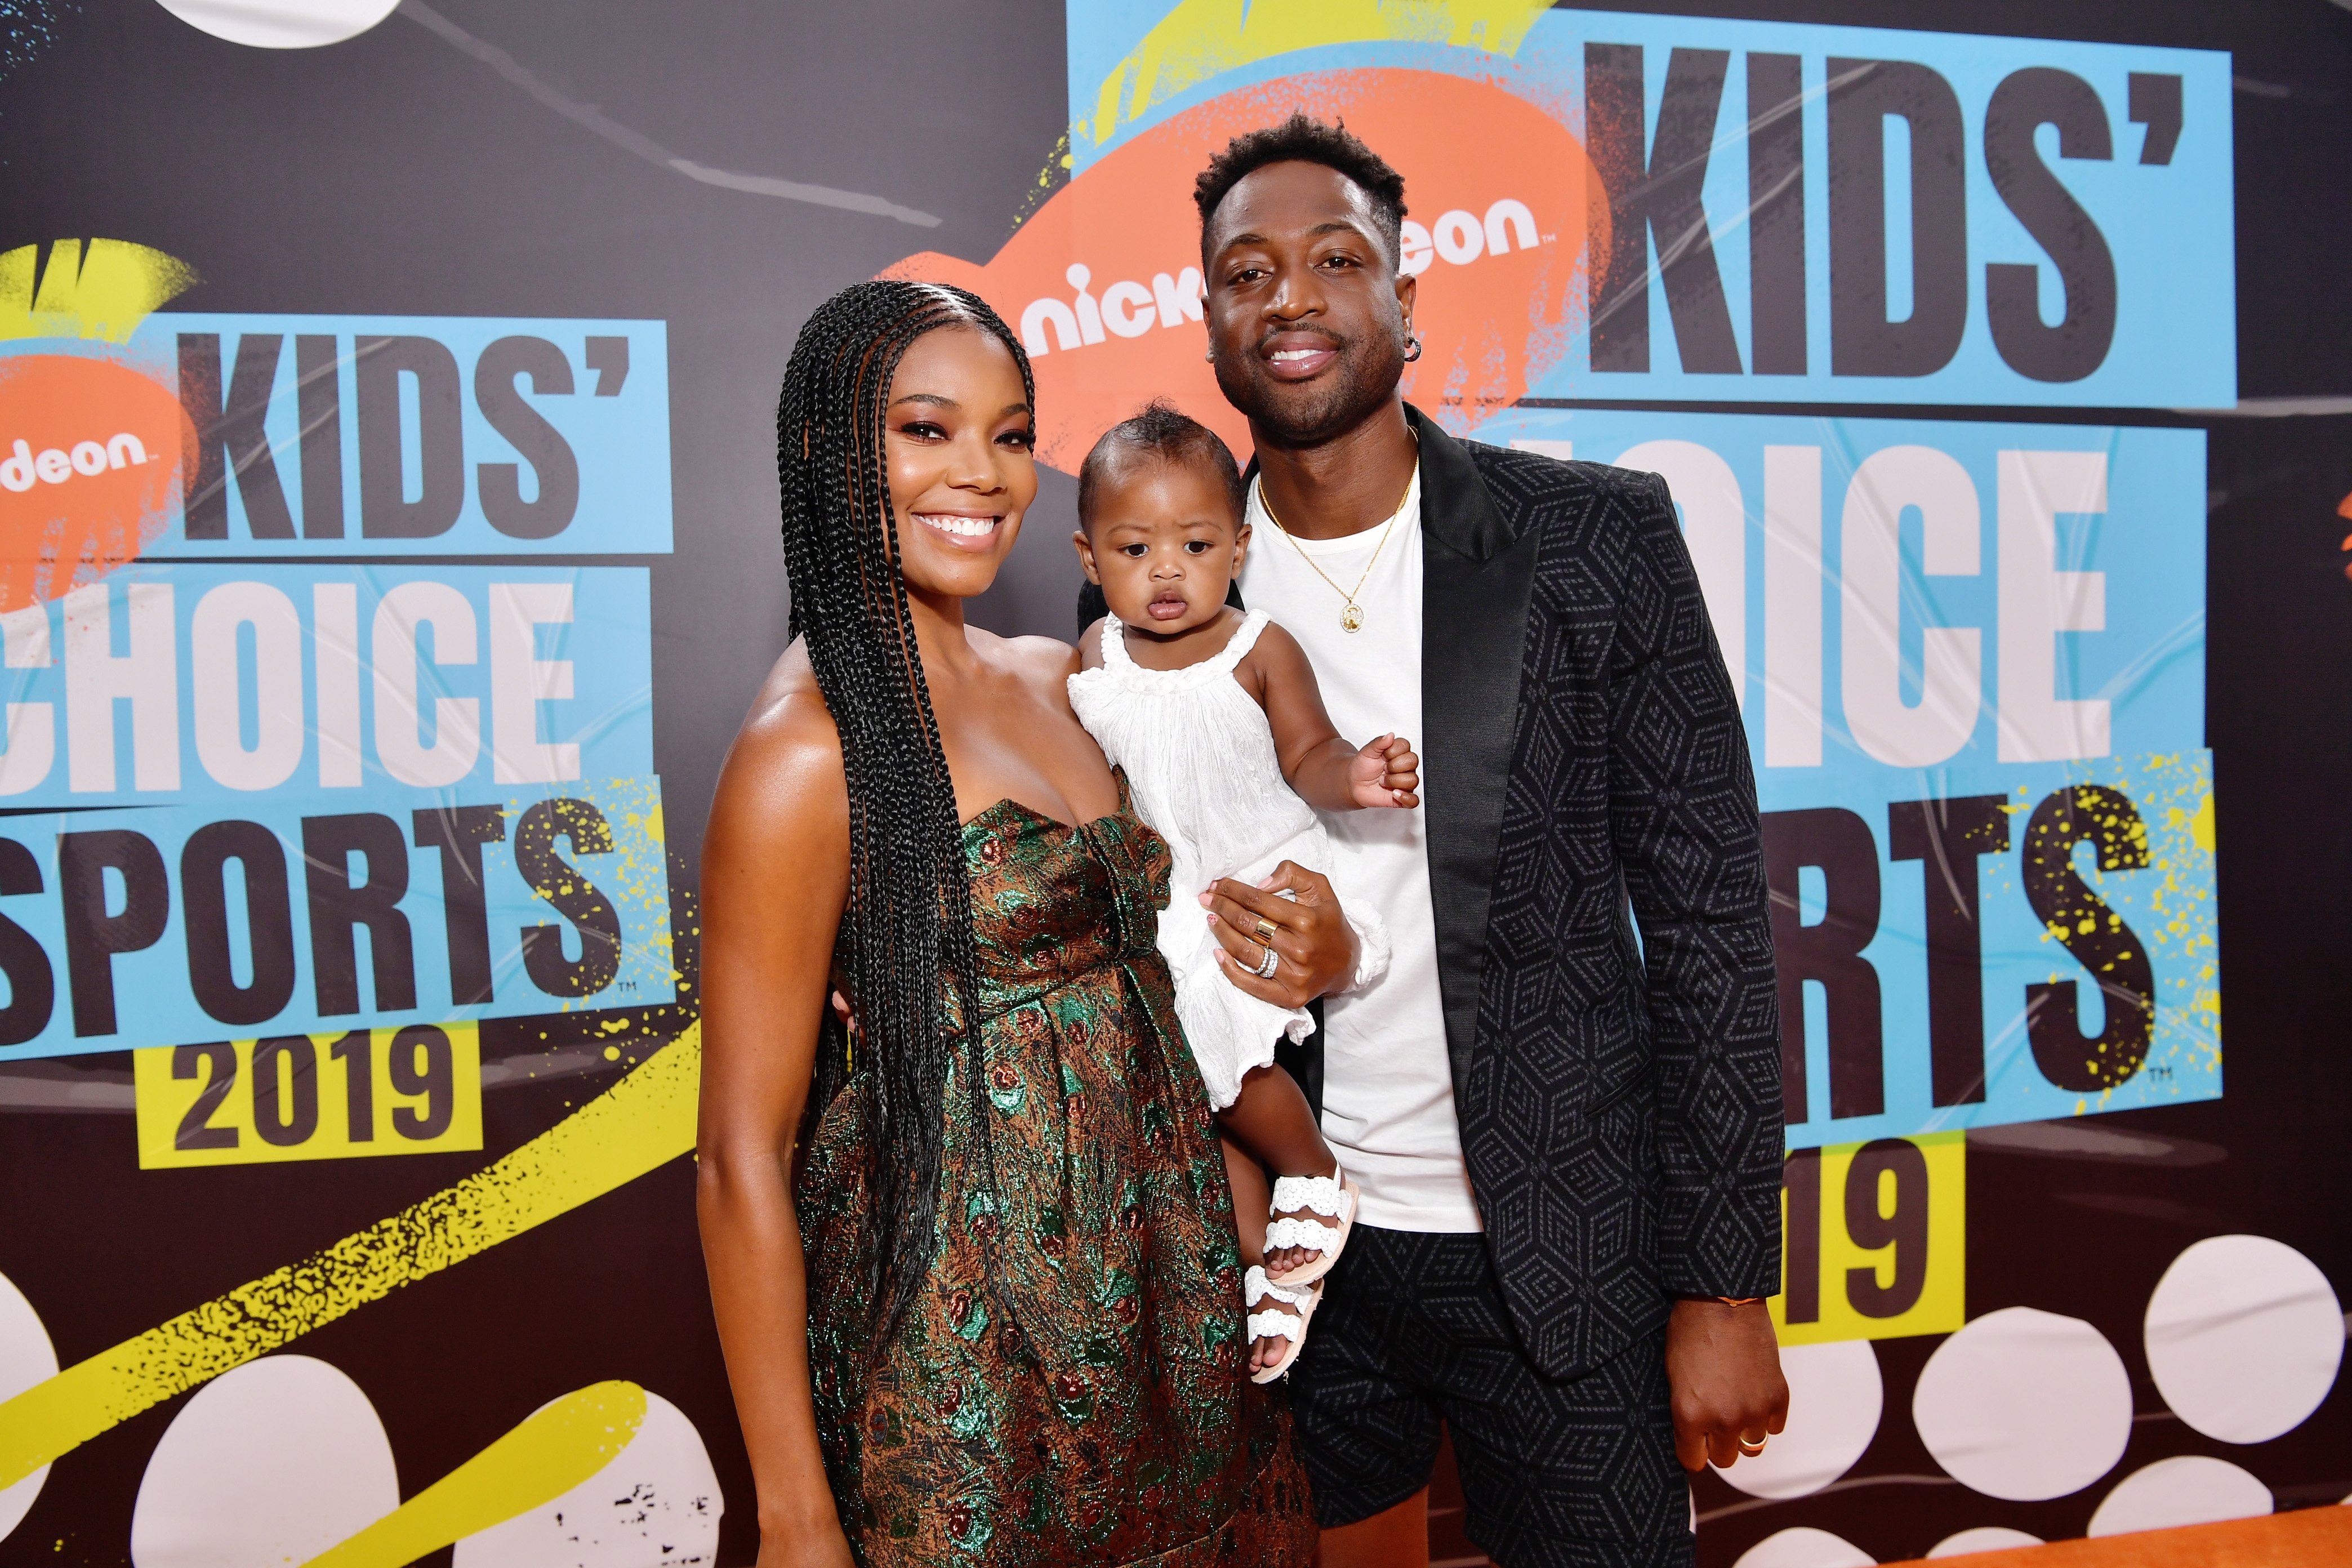 Gabrielle Union, Kaavia James Union Wade, and Dwyane Wade attend Nickelodeon Kids' Choice Sports 2019 at Barker Hangar on July 11, 2019, in Santa Monica, California | Photo: Getty Images